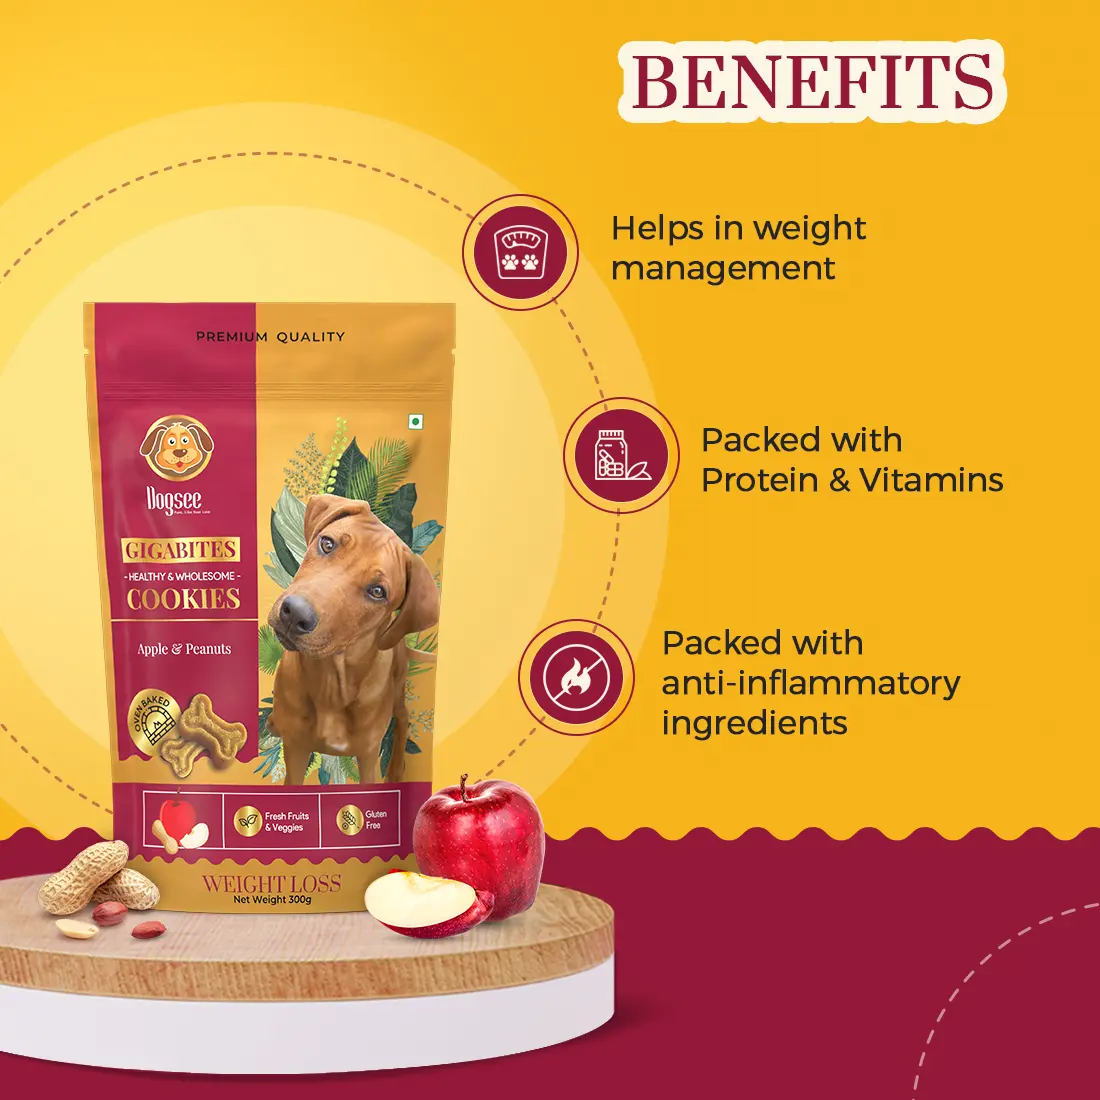 Benefits - Apple and Peanut Cookies for Dogs